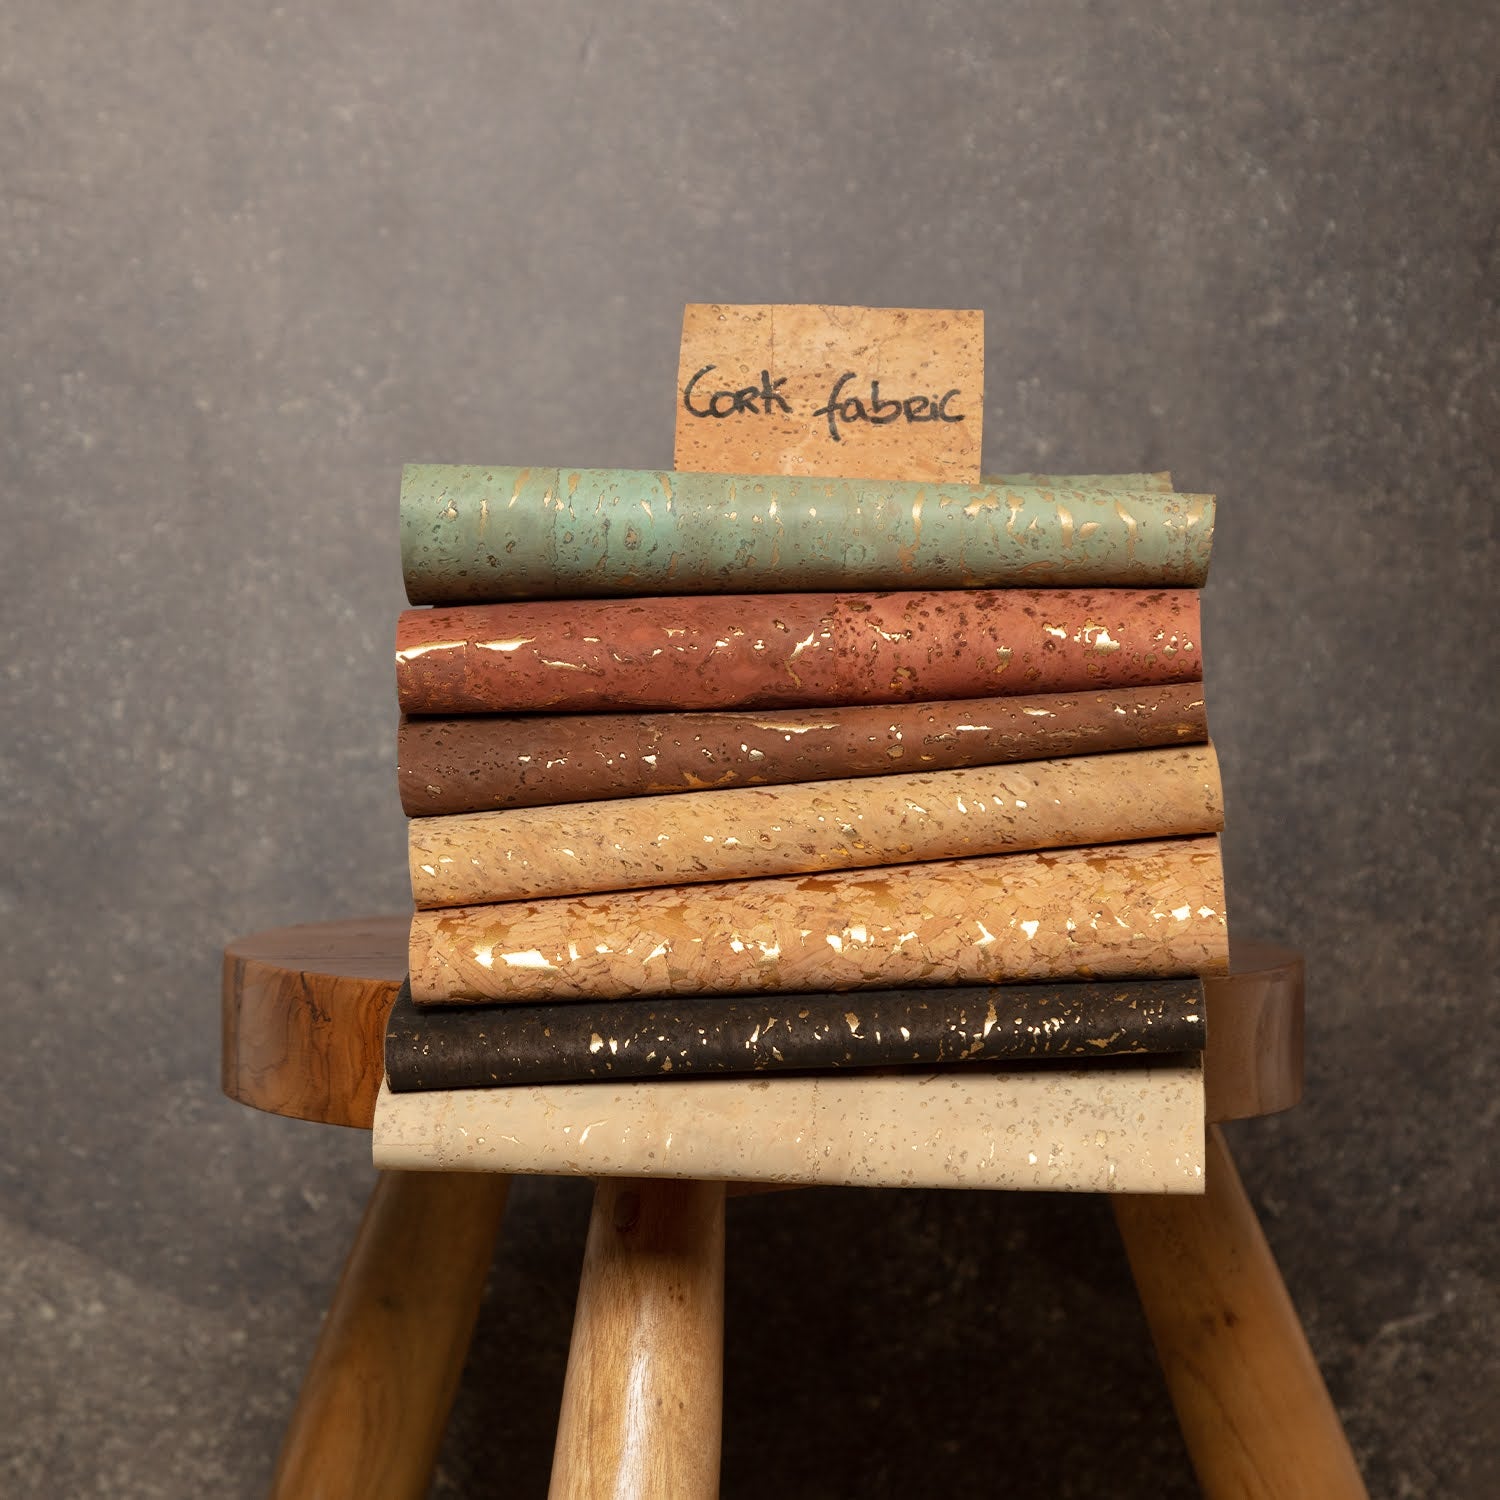 Gold flecked cork fabric - coloured and natural options